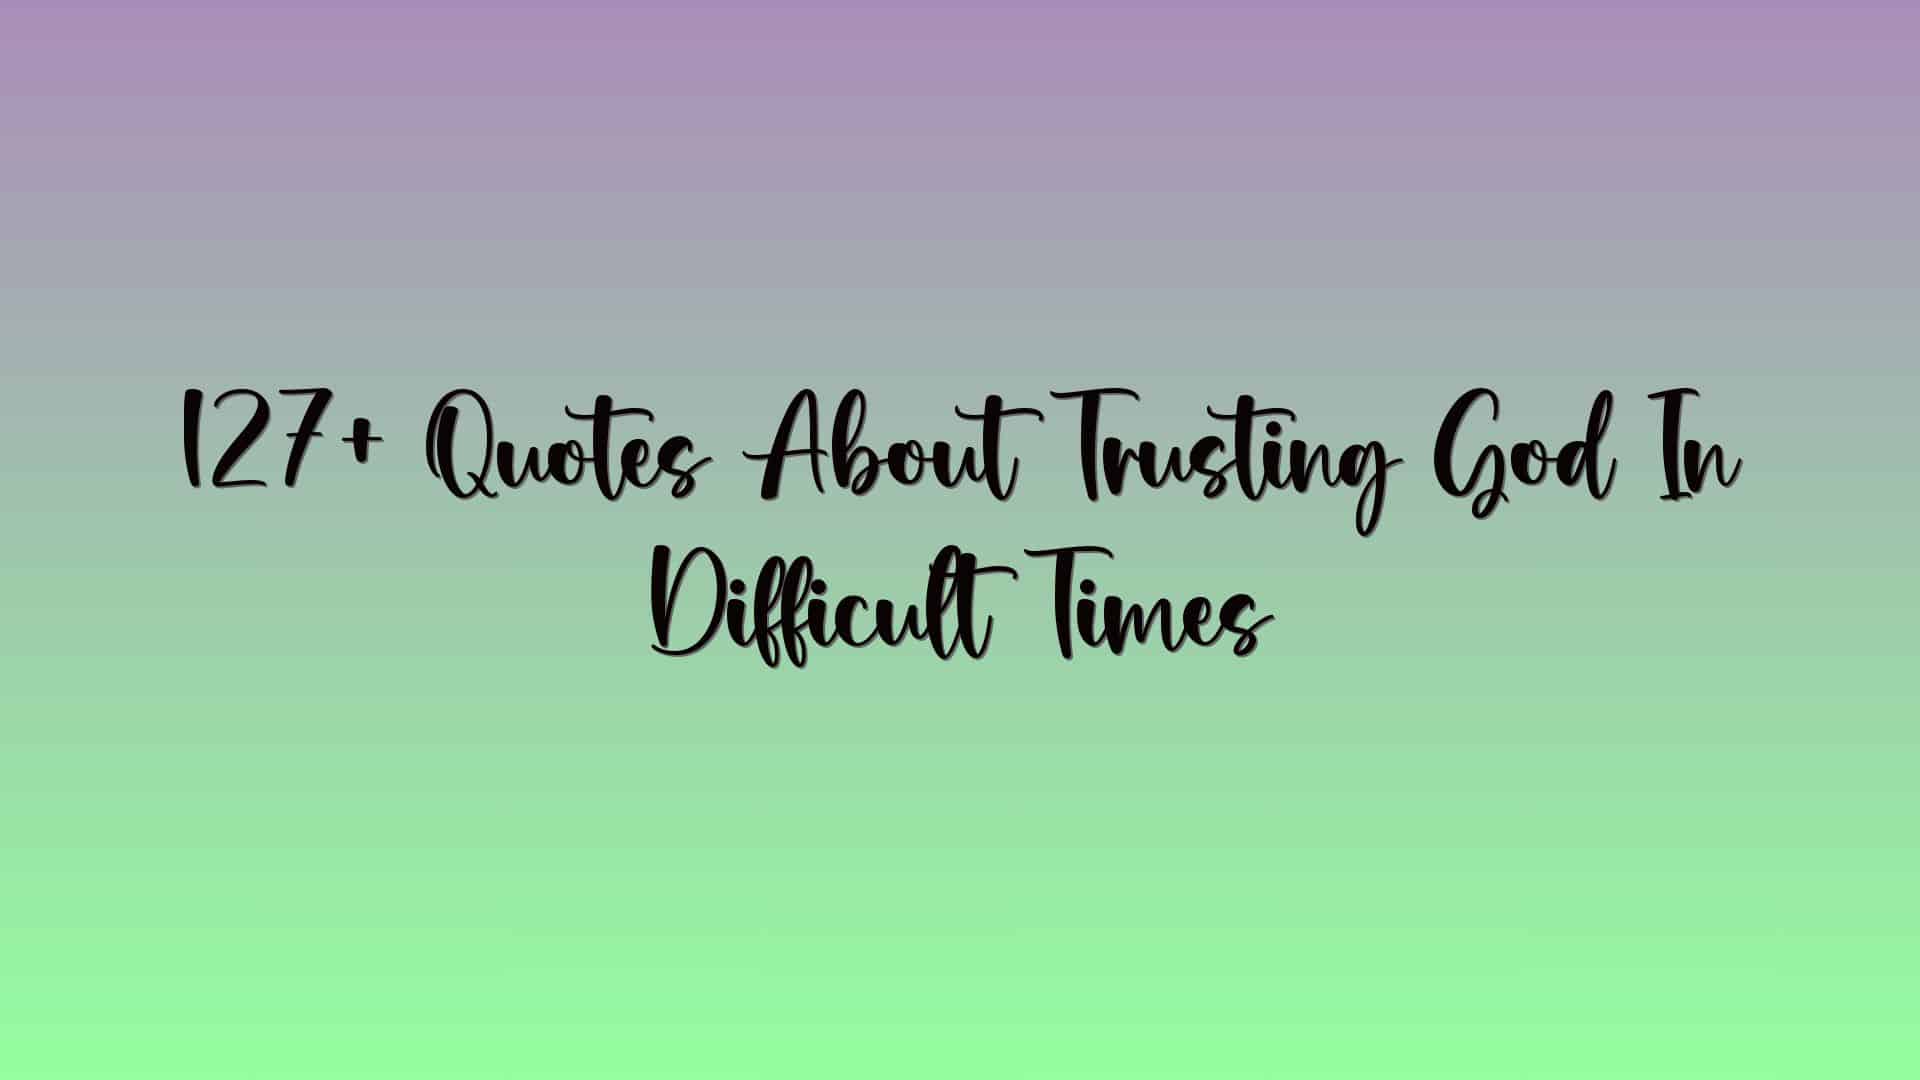 127+ Quotes About Trusting God In Difficult Times